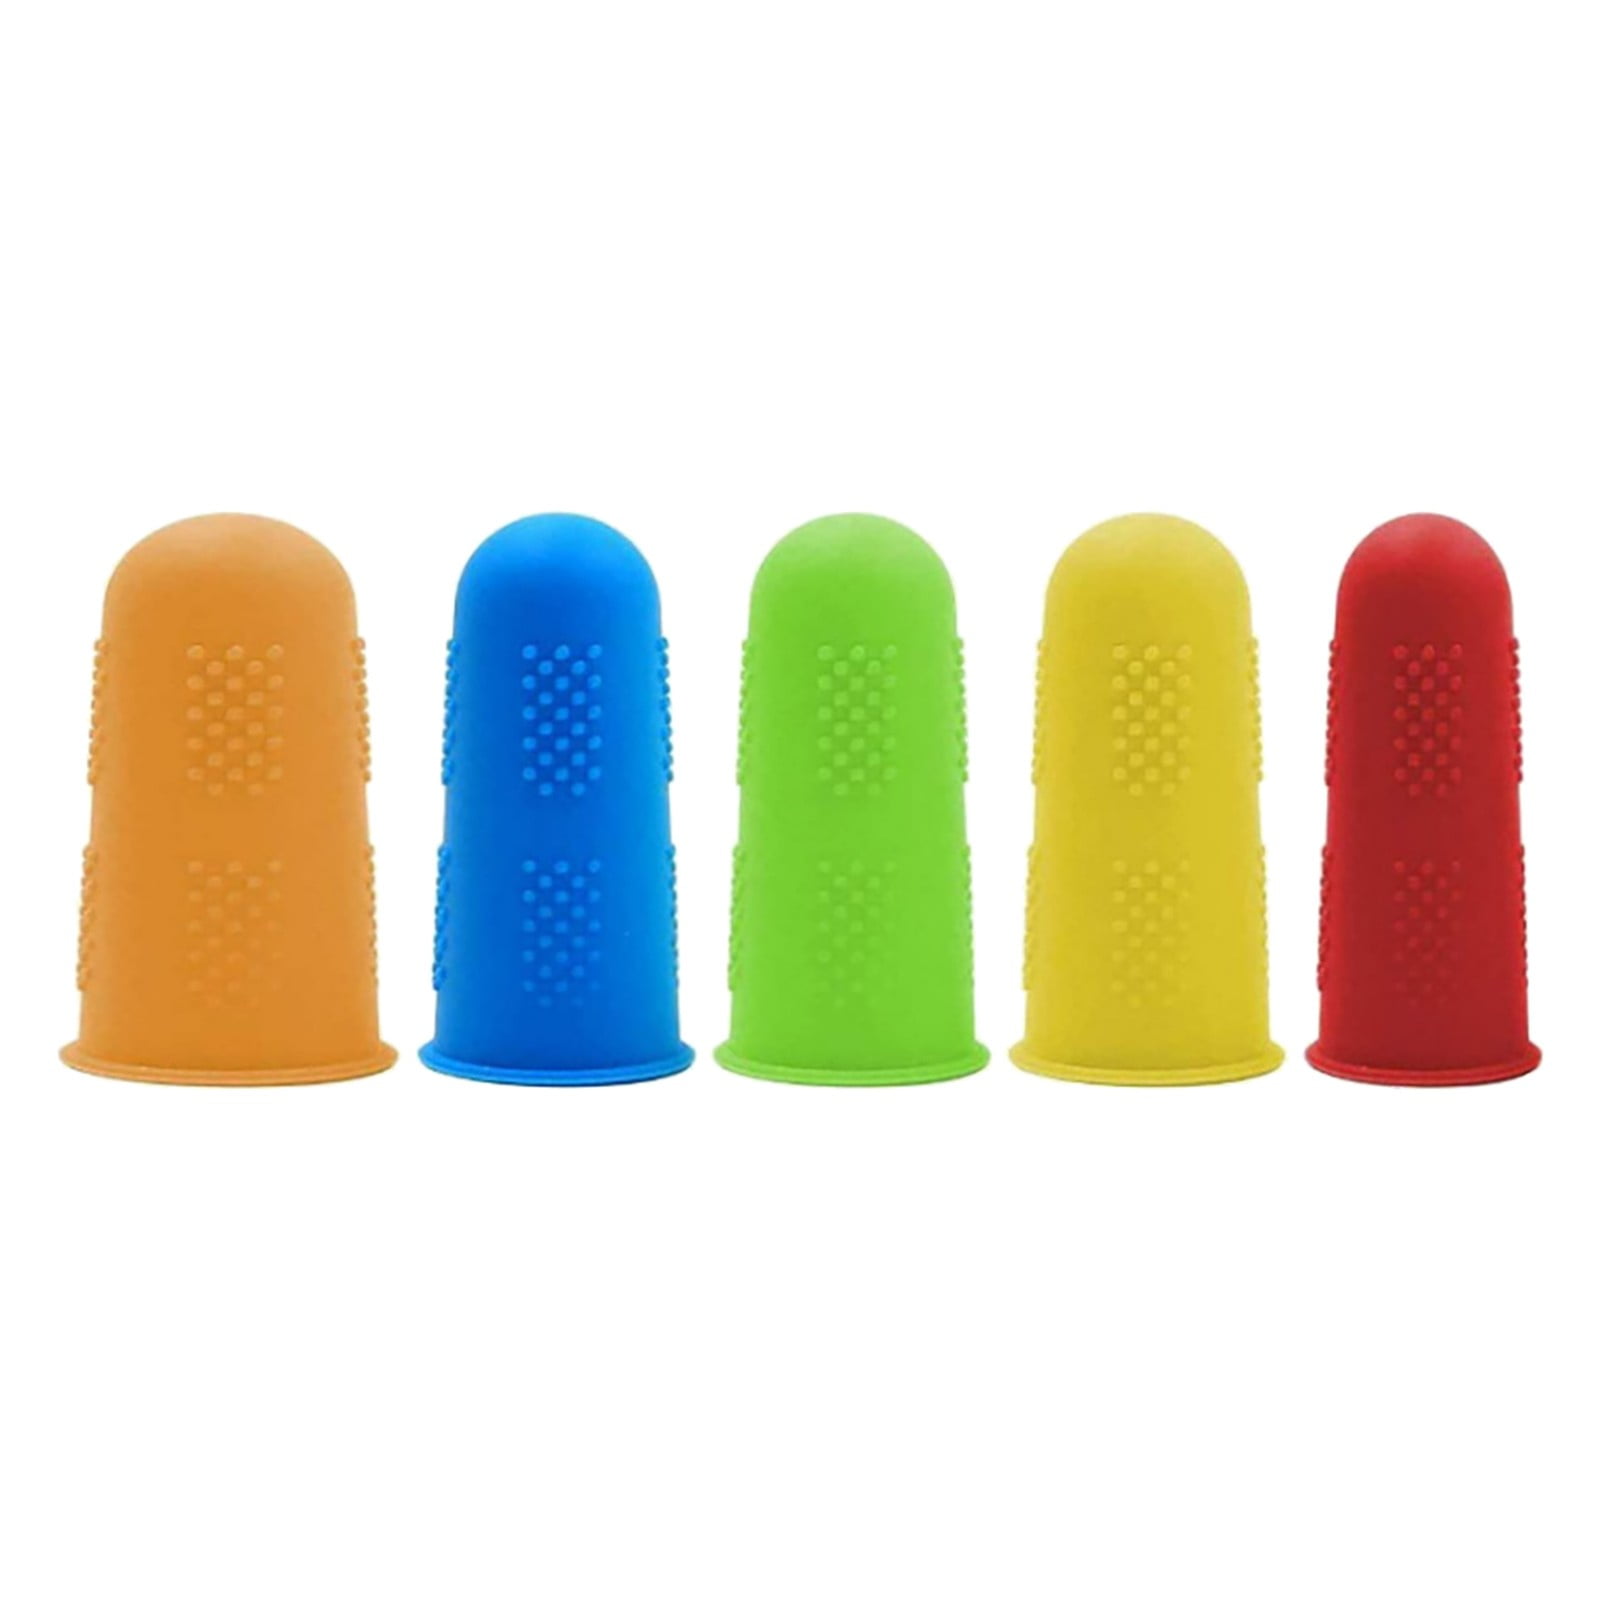 Waroomhouse Child Finger Guard High Toughness Adjustable Silicone Children Nail  Biting Prevention Finger Guard for Kids 